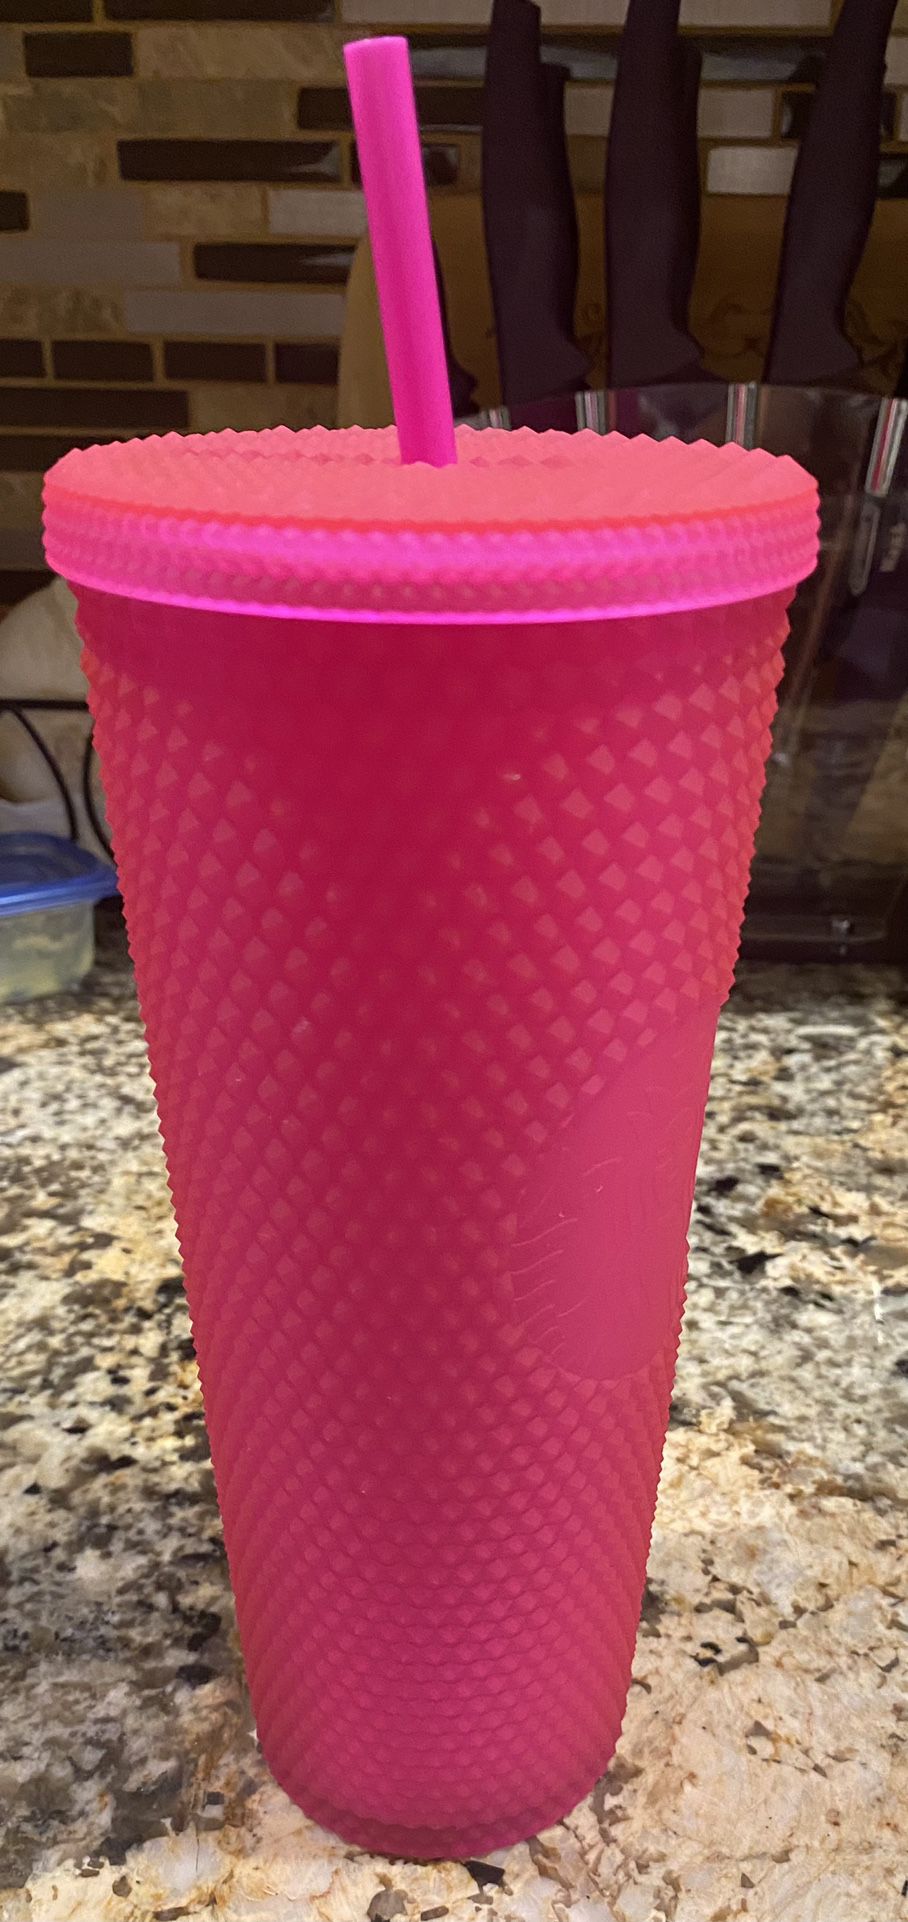 Rose Gold Starbucks Cup- New for Sale in Paramus, NJ - OfferUp